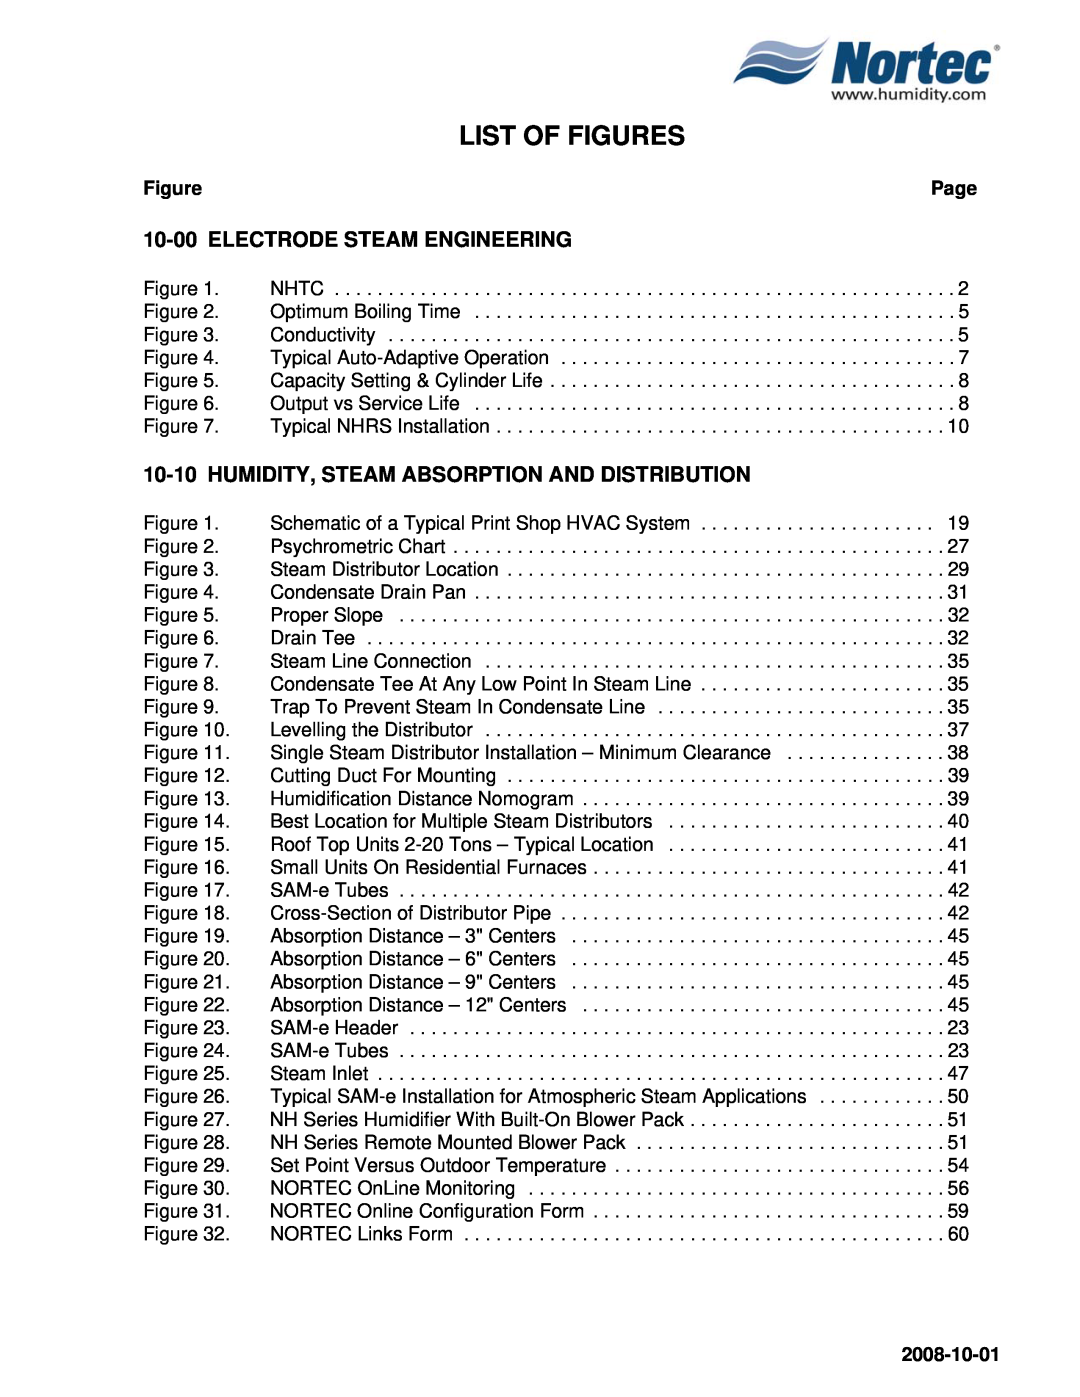 Nortec NHTC, NHPC manual List Of Figures, 10-00ELECTRODE STEAM ENGINEERING, 10-10HUMIDITY, STEAM ABSORPTION AND DISTRIBUTION 